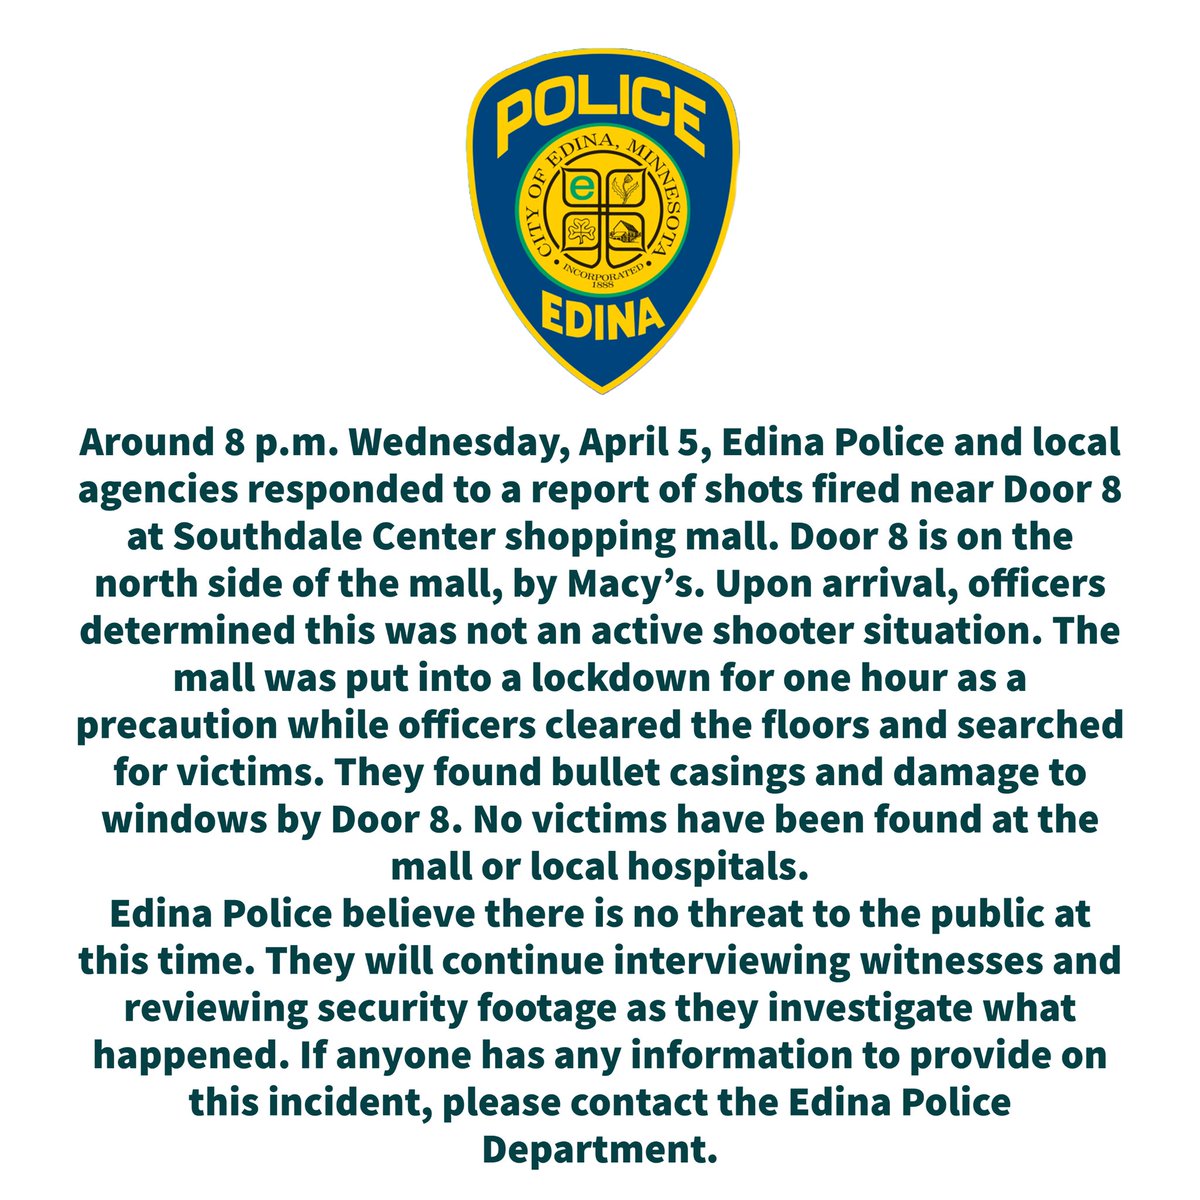 Latest from Edina PD on the incident at Southdale Center mall we first told you about tonight nnBullet casings and damage to windows were found by Door 8 but no gunshot victims were located. The mall was in a partial lockdown for about an hour as authorities secured the scene